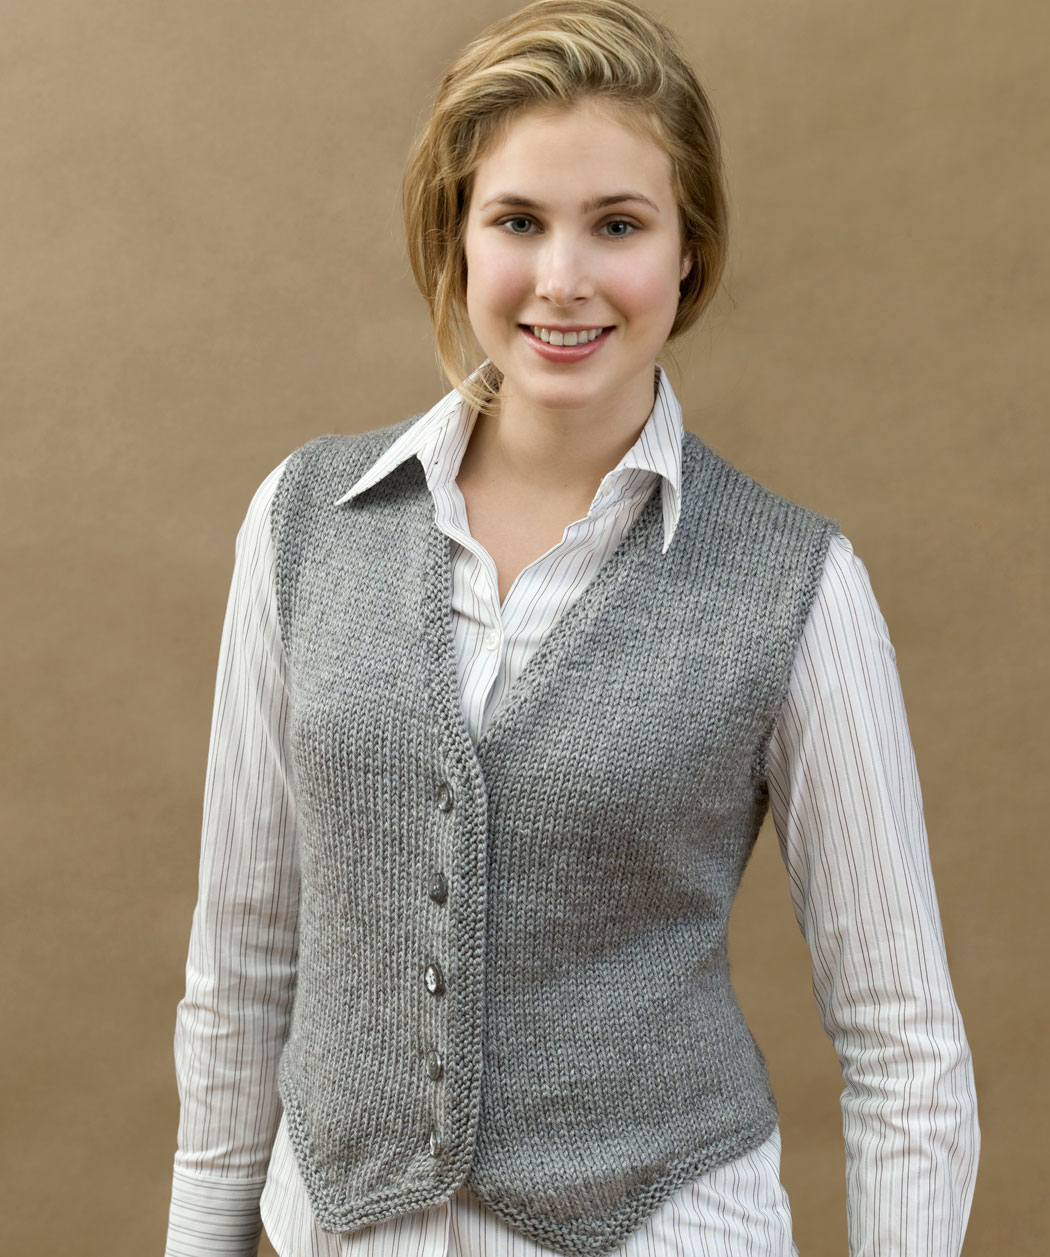 Knitted Vest Patterns | A Knitting Blog